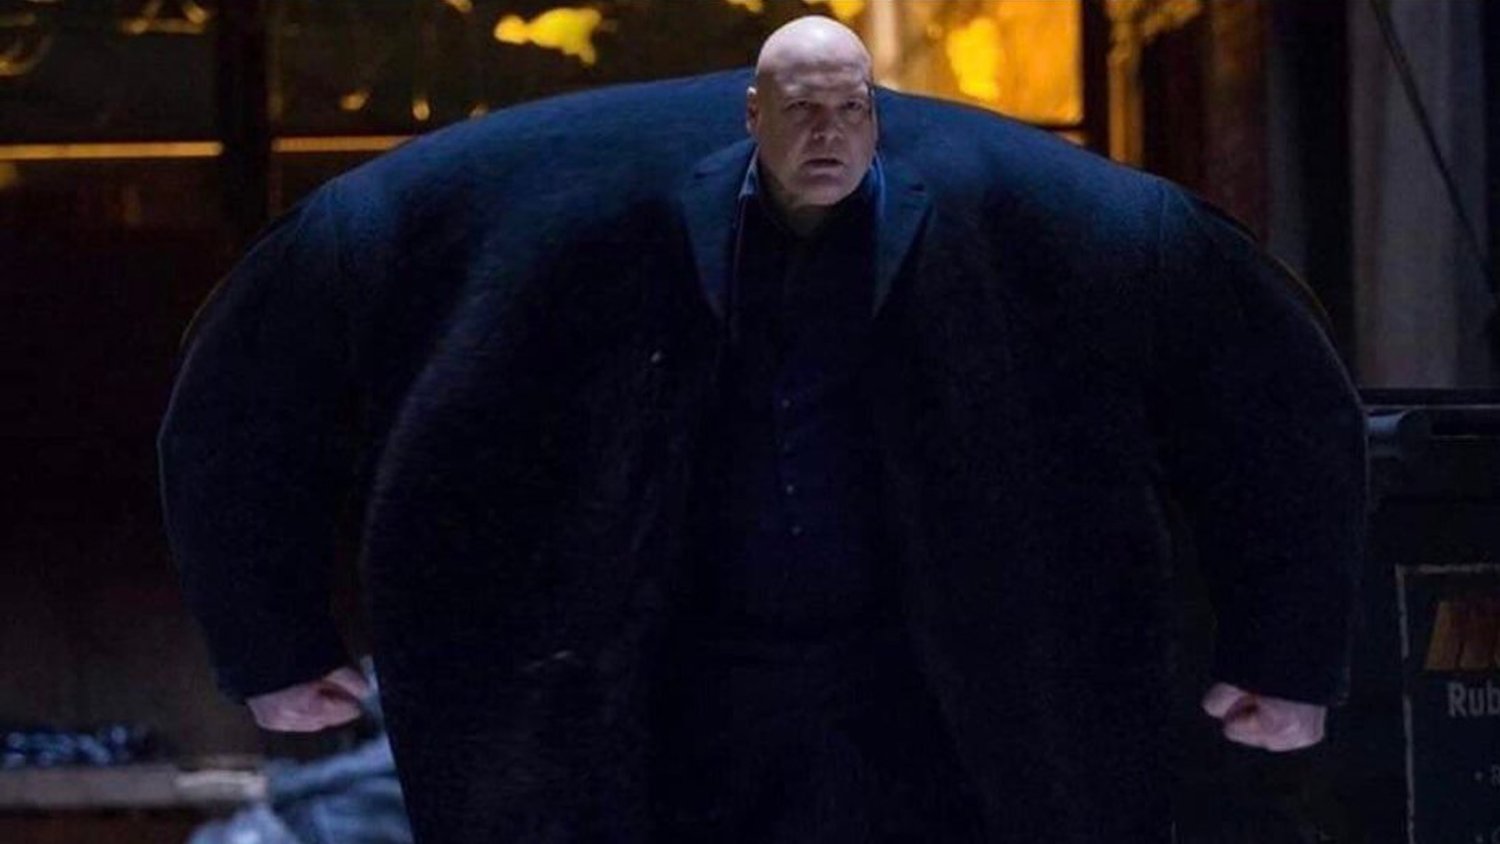 this-reimagining-of-vincent-donofrios-kingpin-in-the-stye-of-the-character-design-in-into-the-spider-verse-is-ridiculous-social.jpg